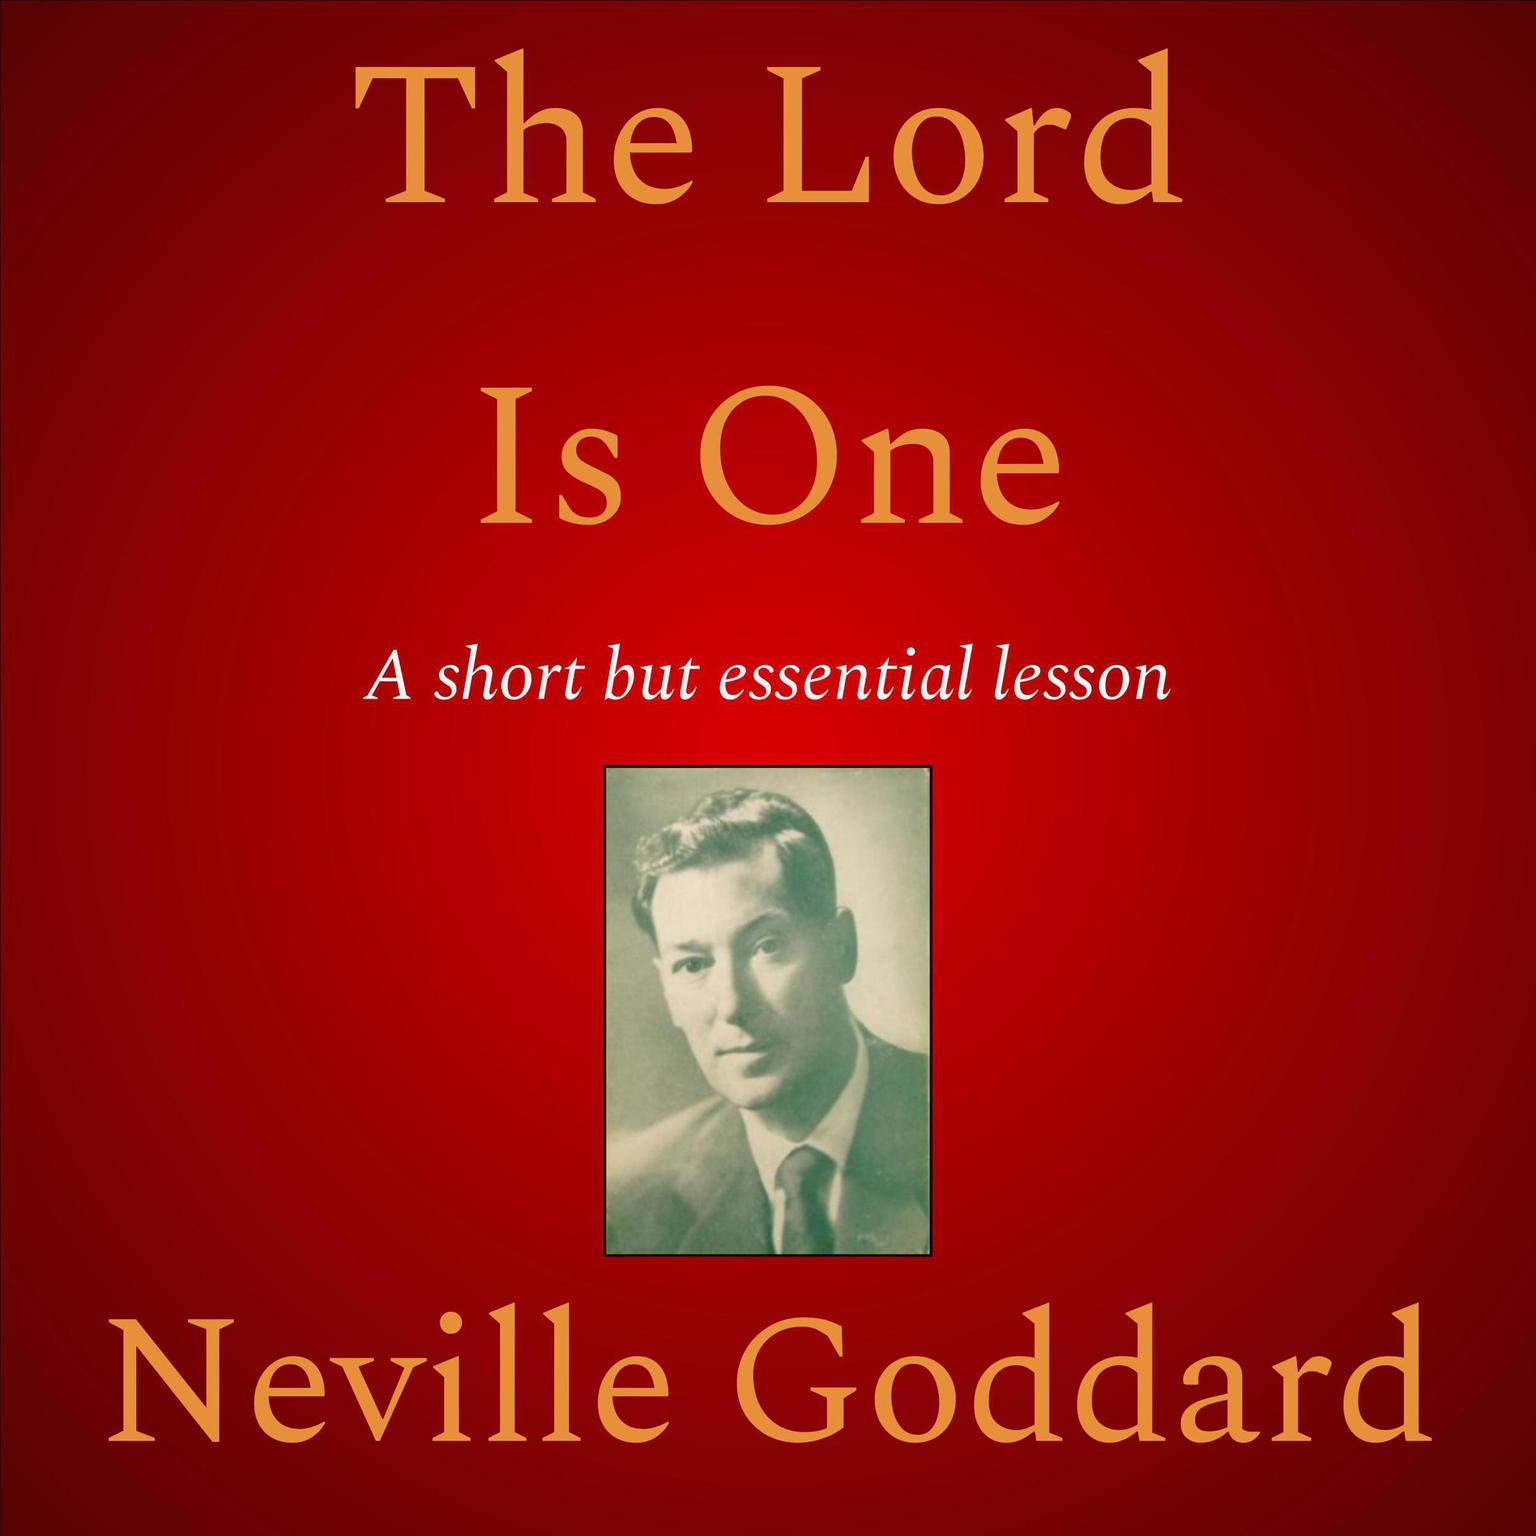 The Lord Is One Audiobook, by Neville Goddard